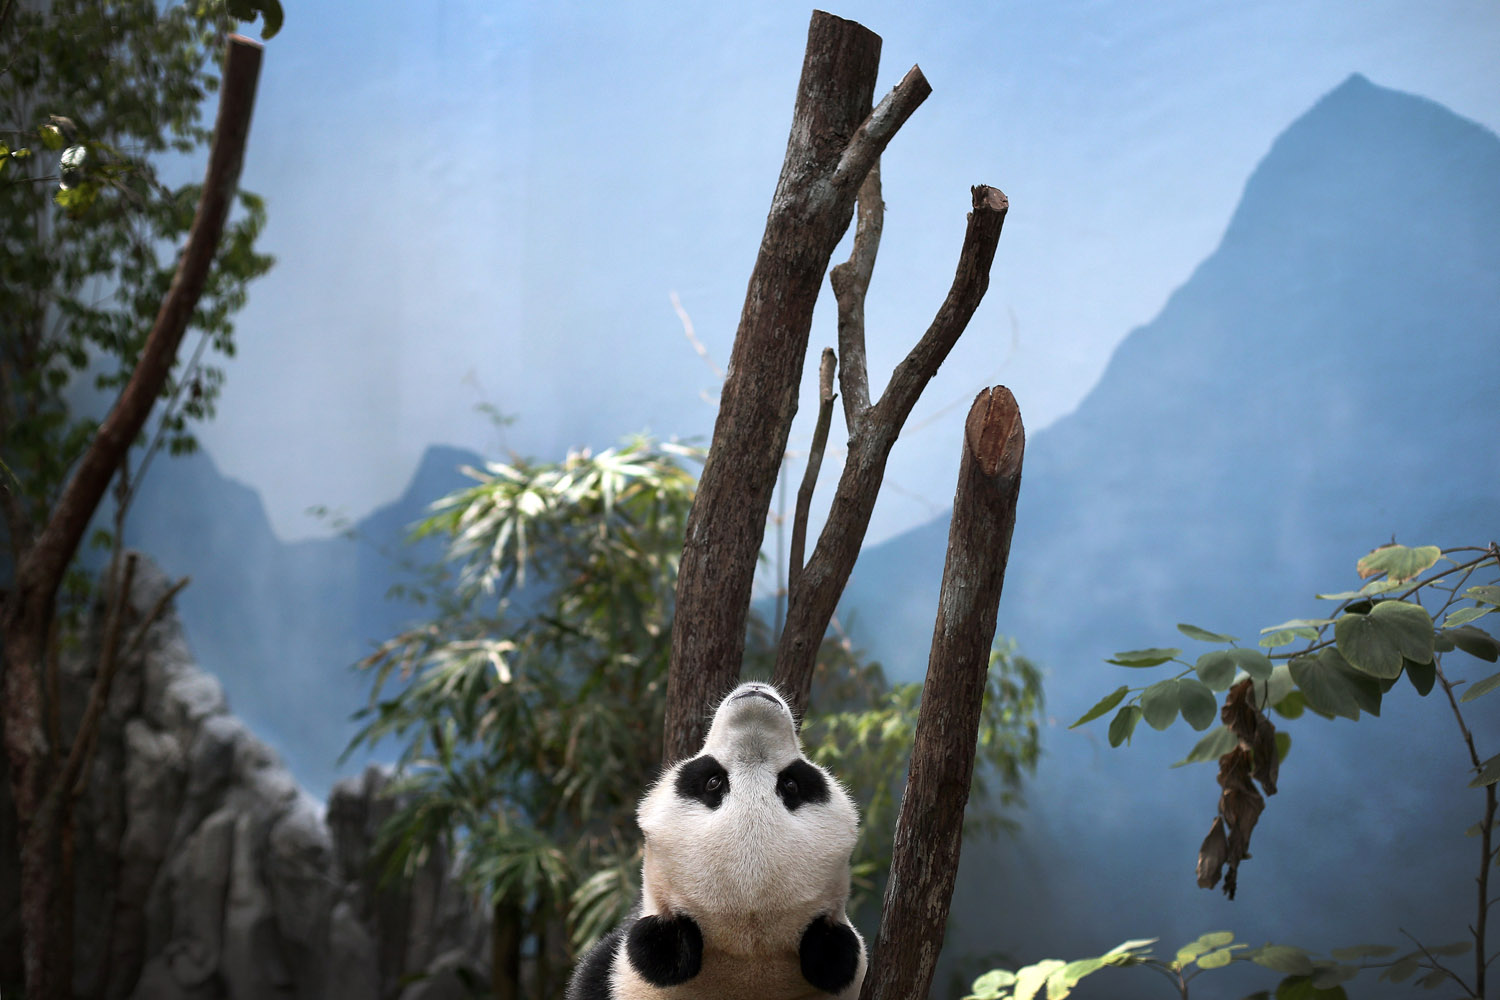 Image: Oct. 29, 2012. Female Giant Panda "Jia Jia," one of two Giant Pandas from China is seen in its enclosure in Singapore.